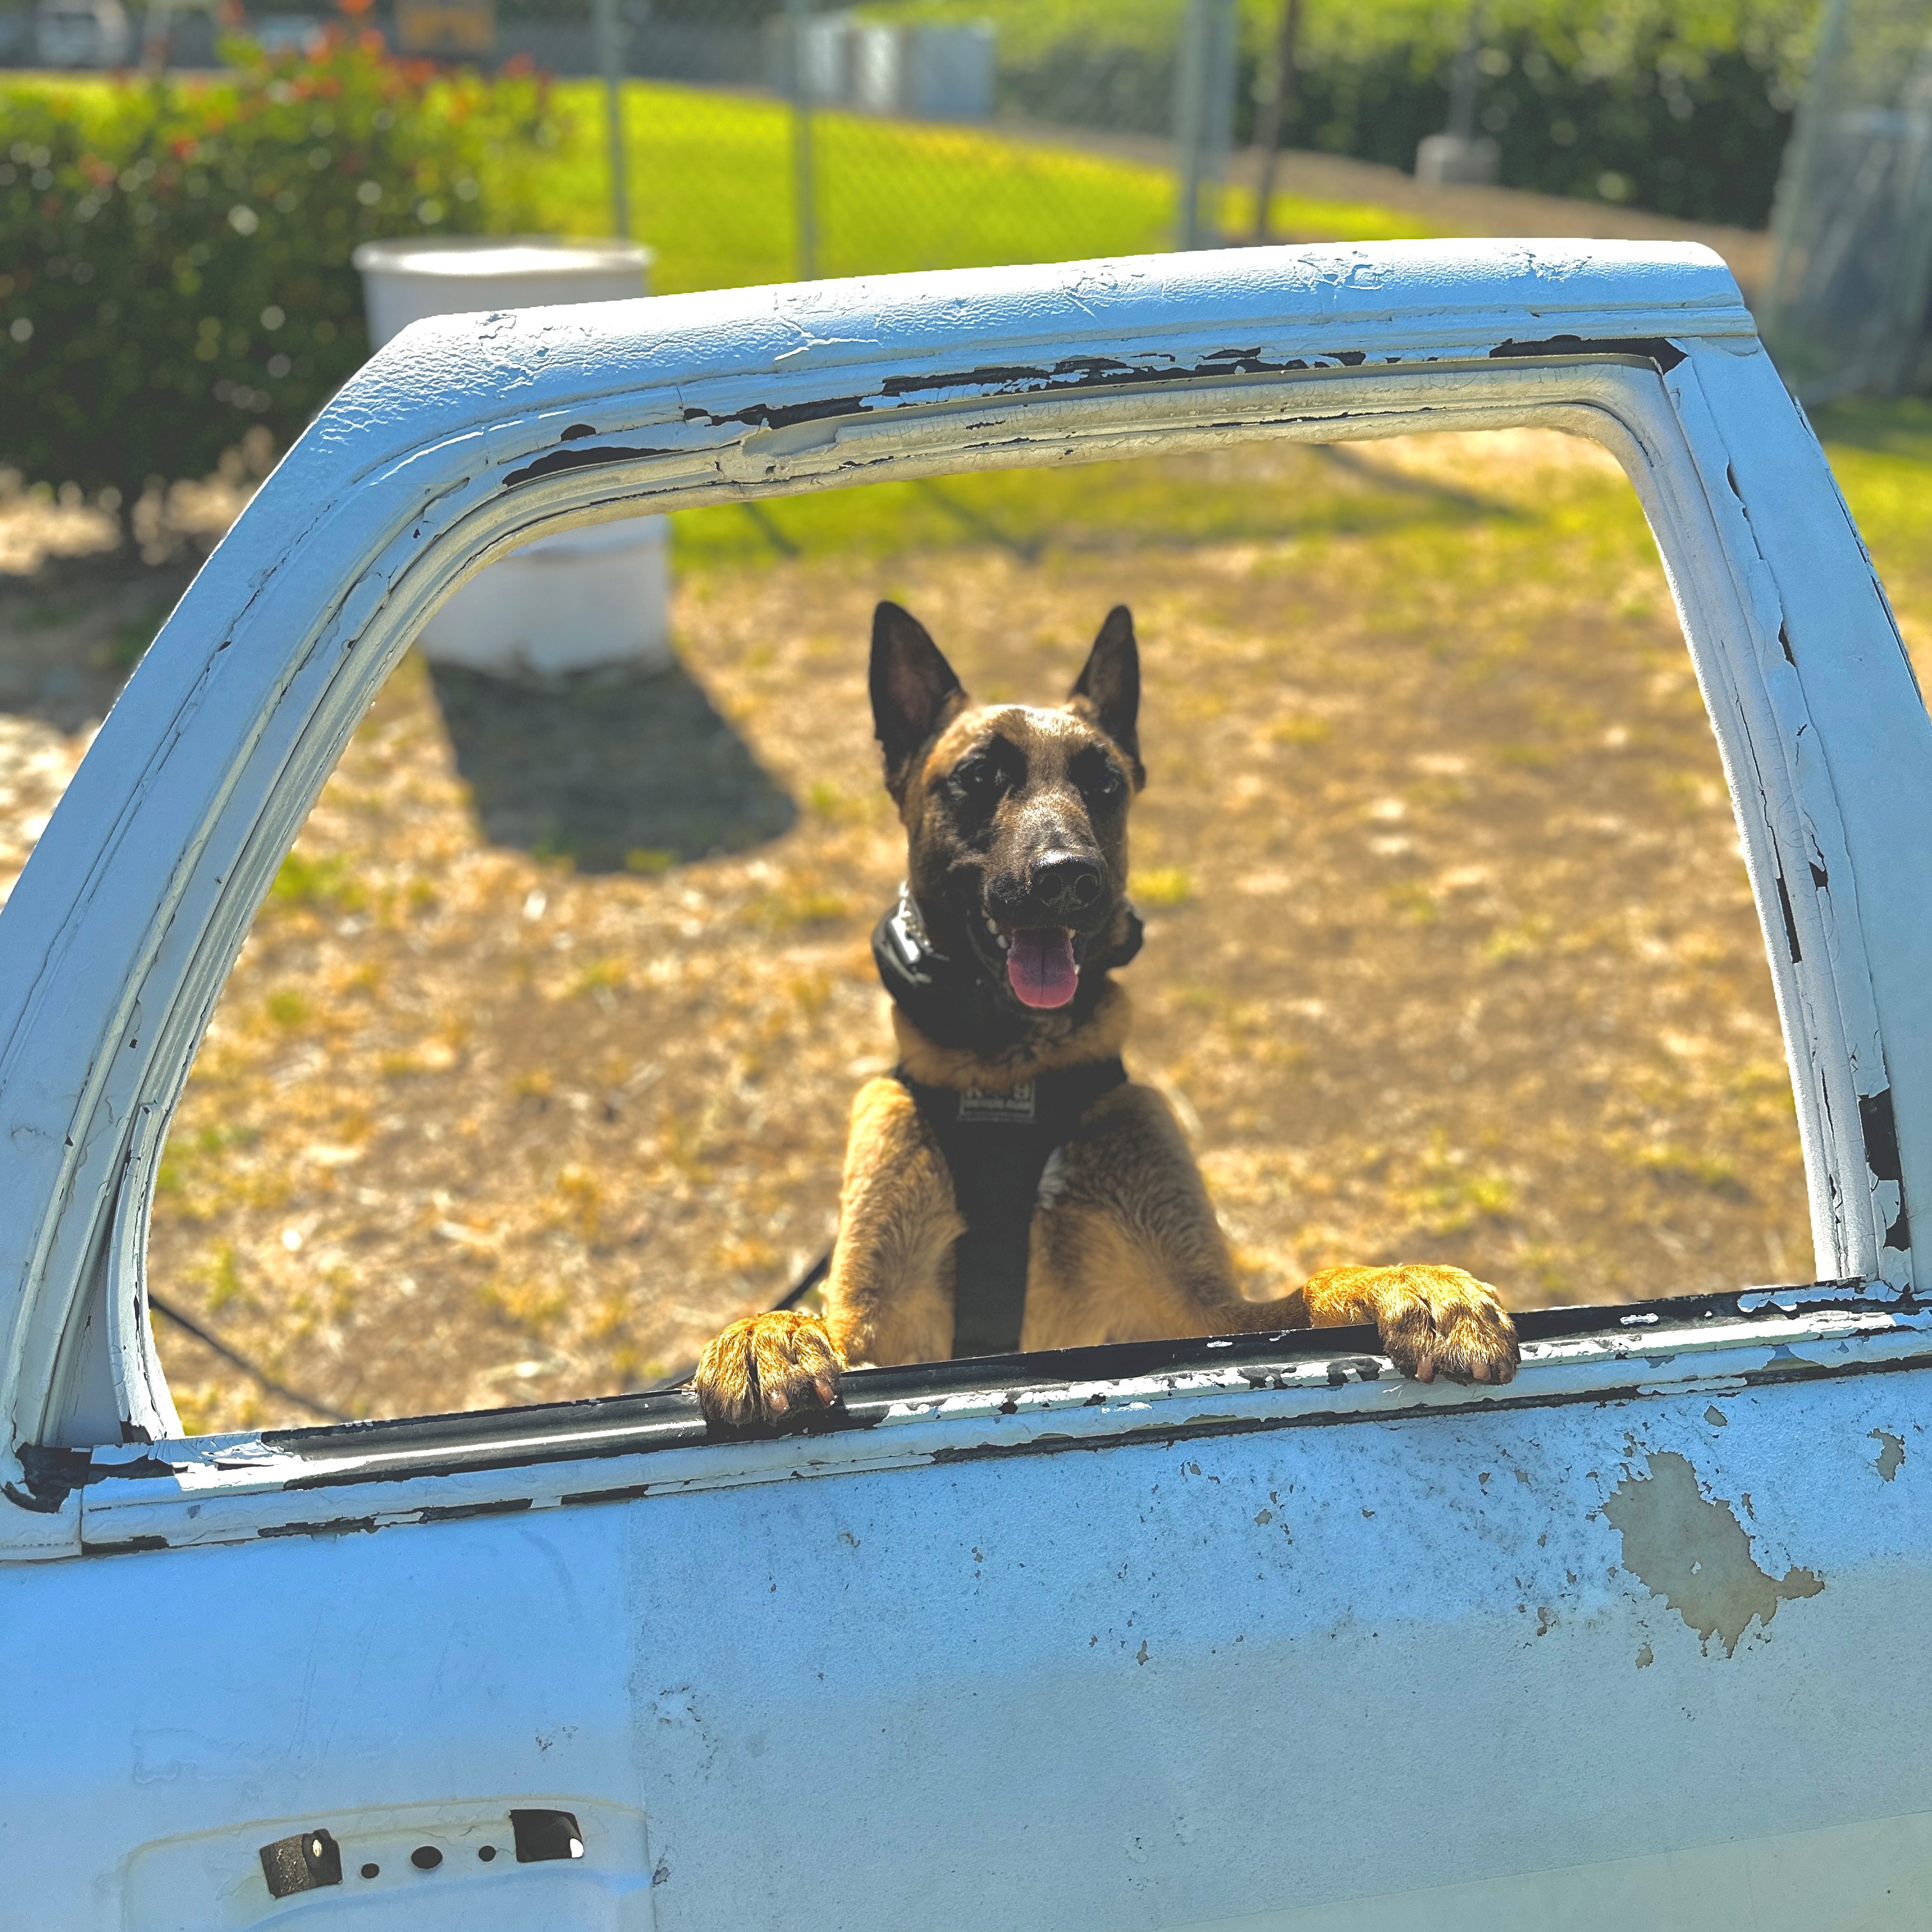 Clovis Police K-9 standing behind a detached car door used for training